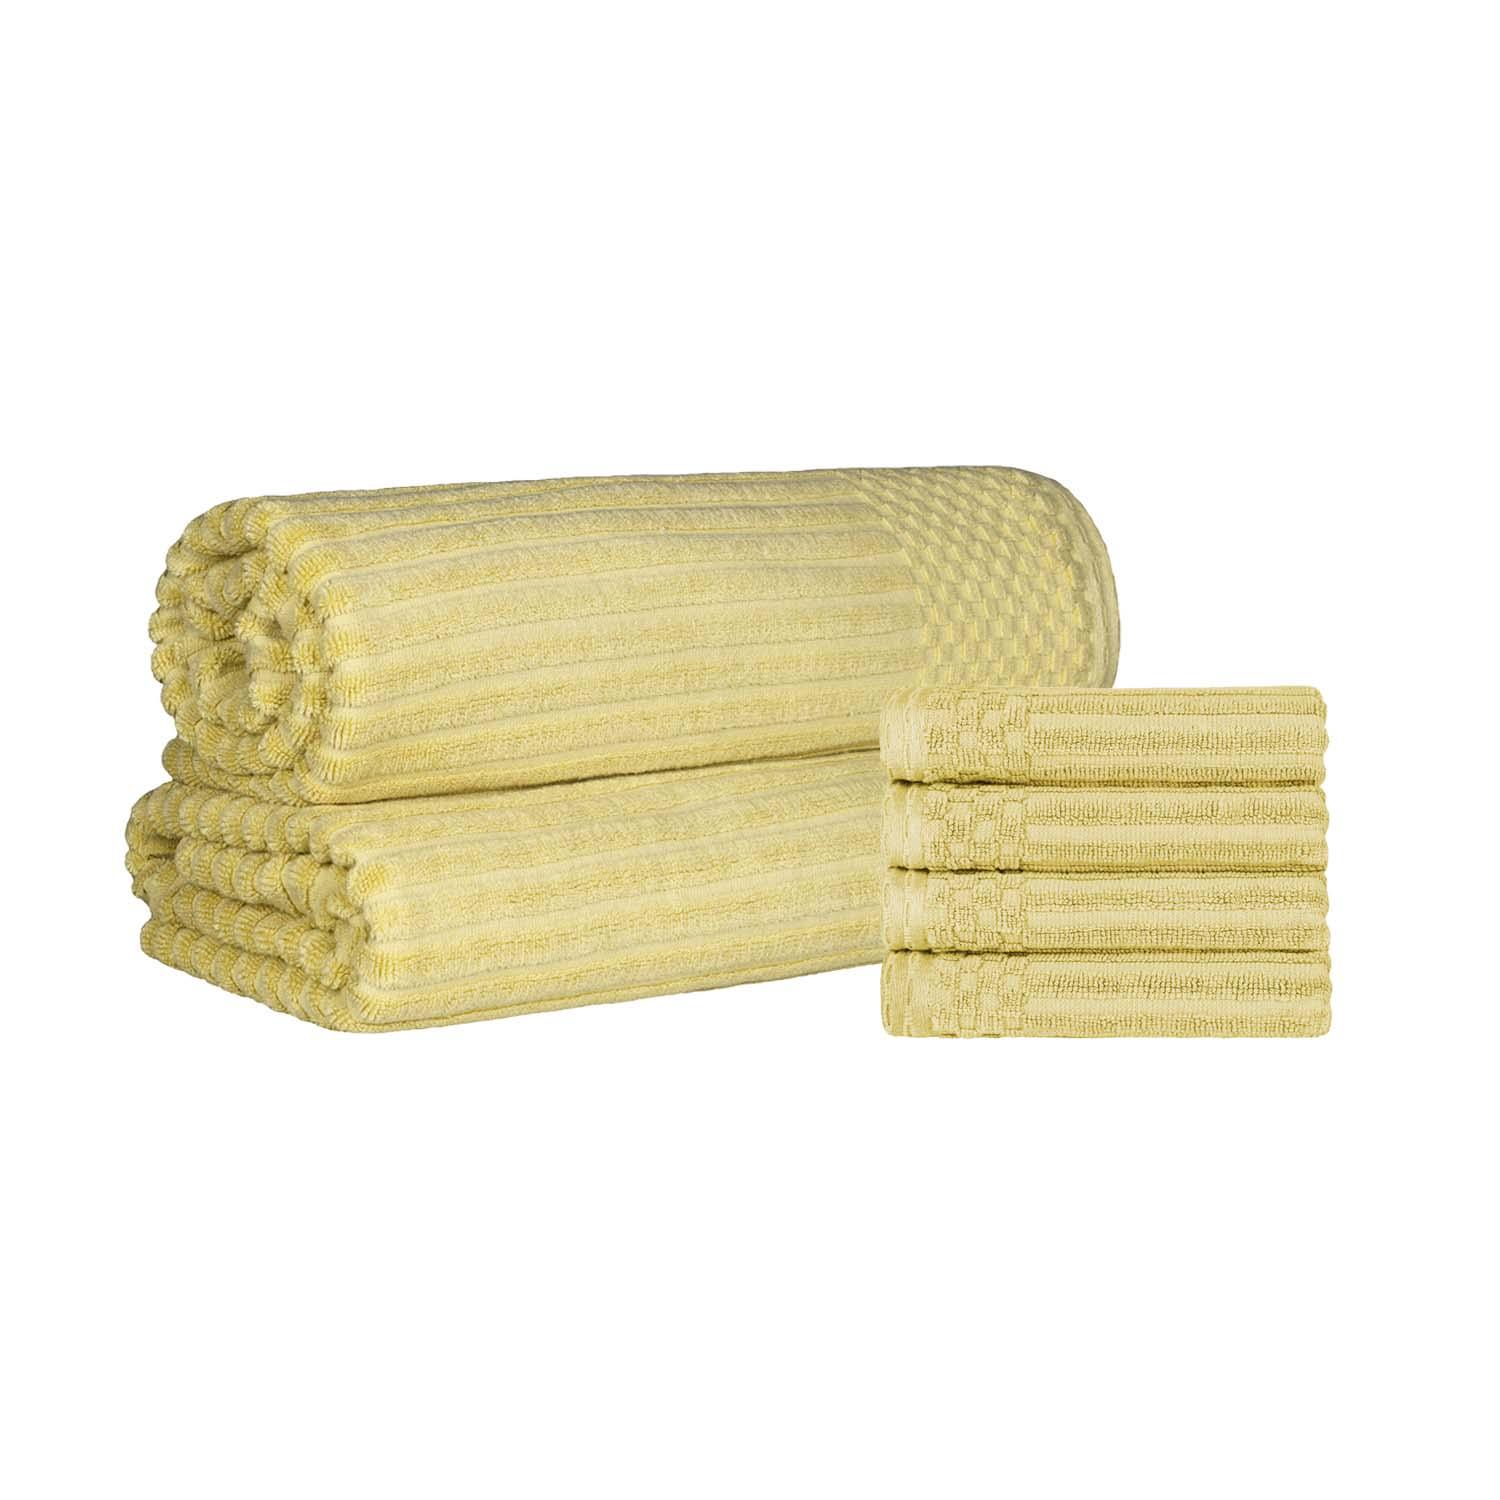  Superior Soho Ribbed Textured Cotton Ultra-Absorbent Hand Towel and Bath Sheet Set - Golden Mist